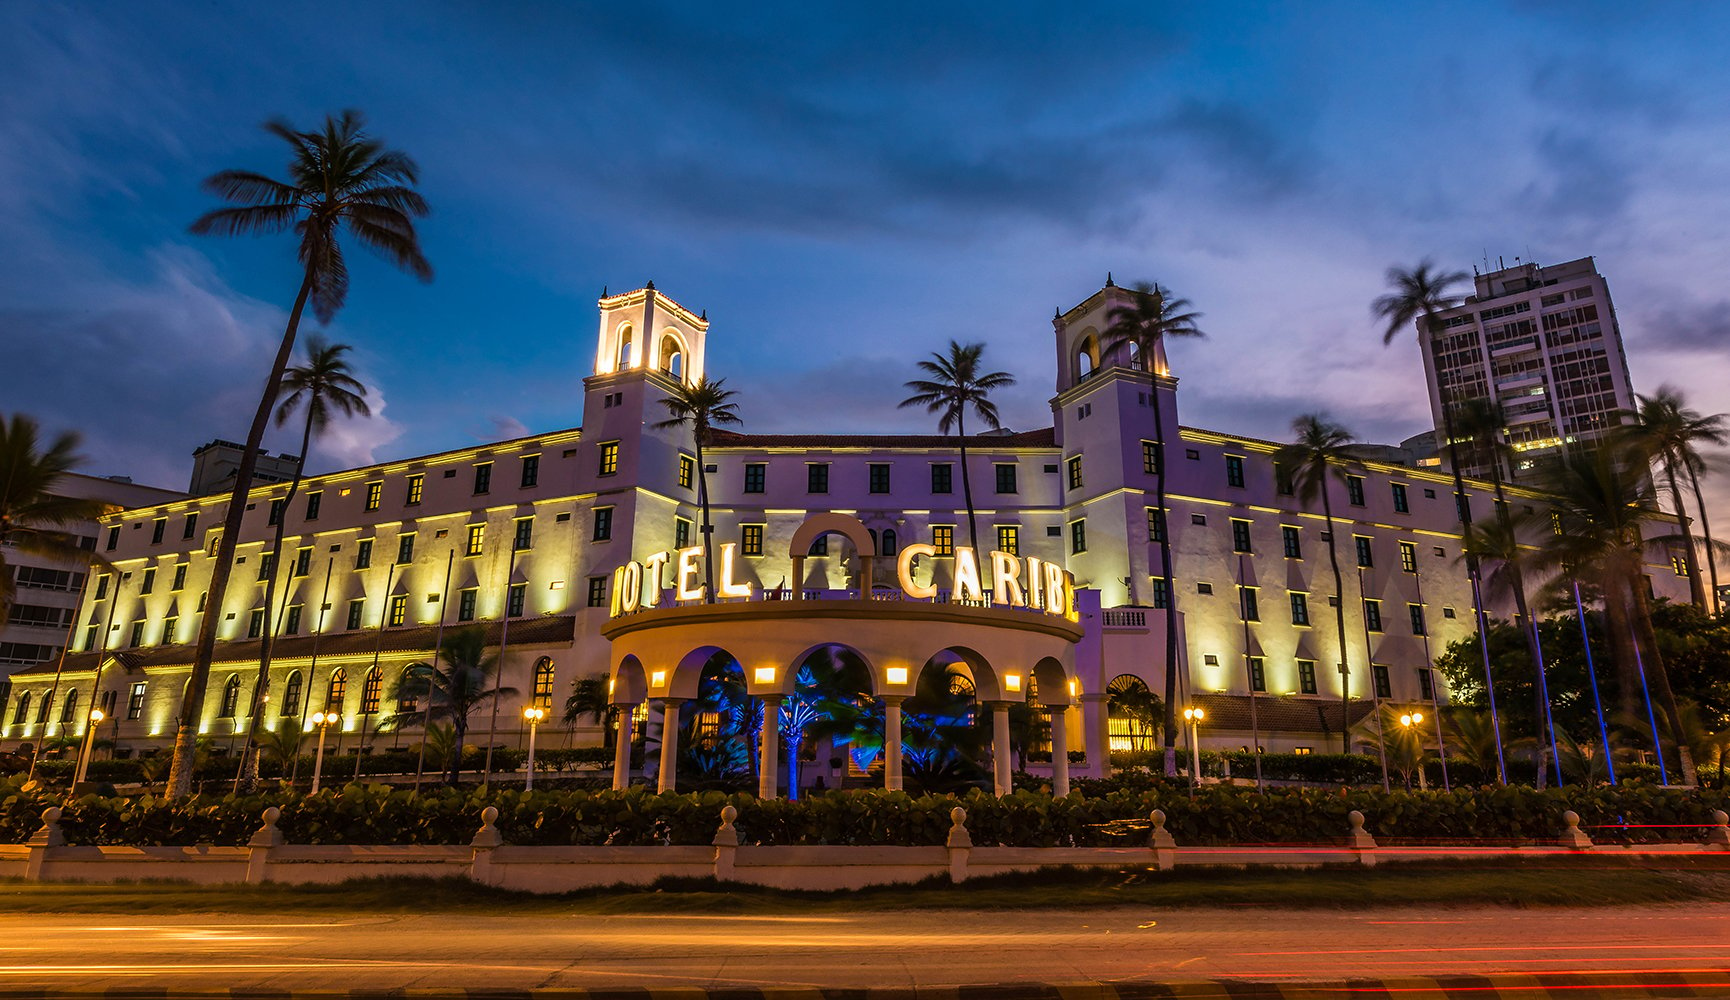 The Hotel Caribe by Faranda Grand was the first hotel to open in Cartagena back in 1945